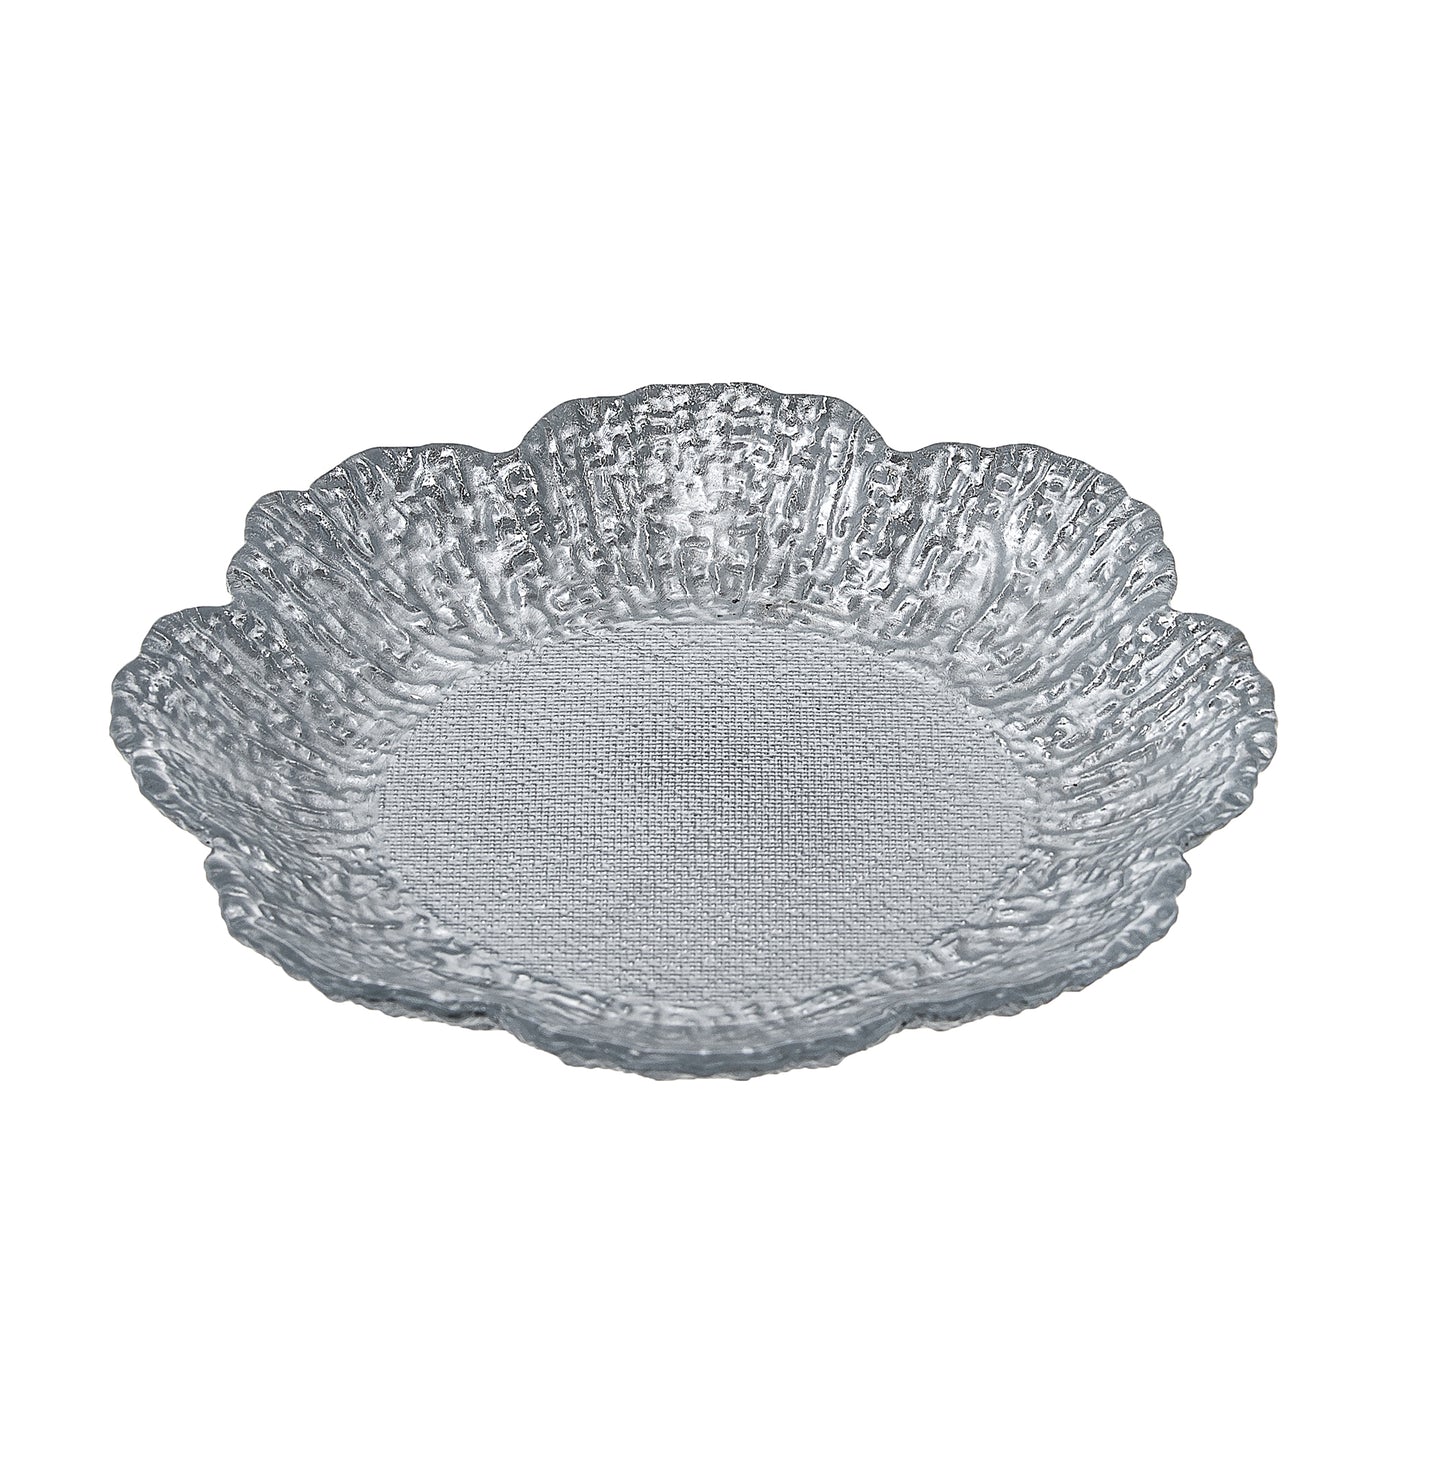 Set 4 Flower Shaped Plates Scalloped-Silver